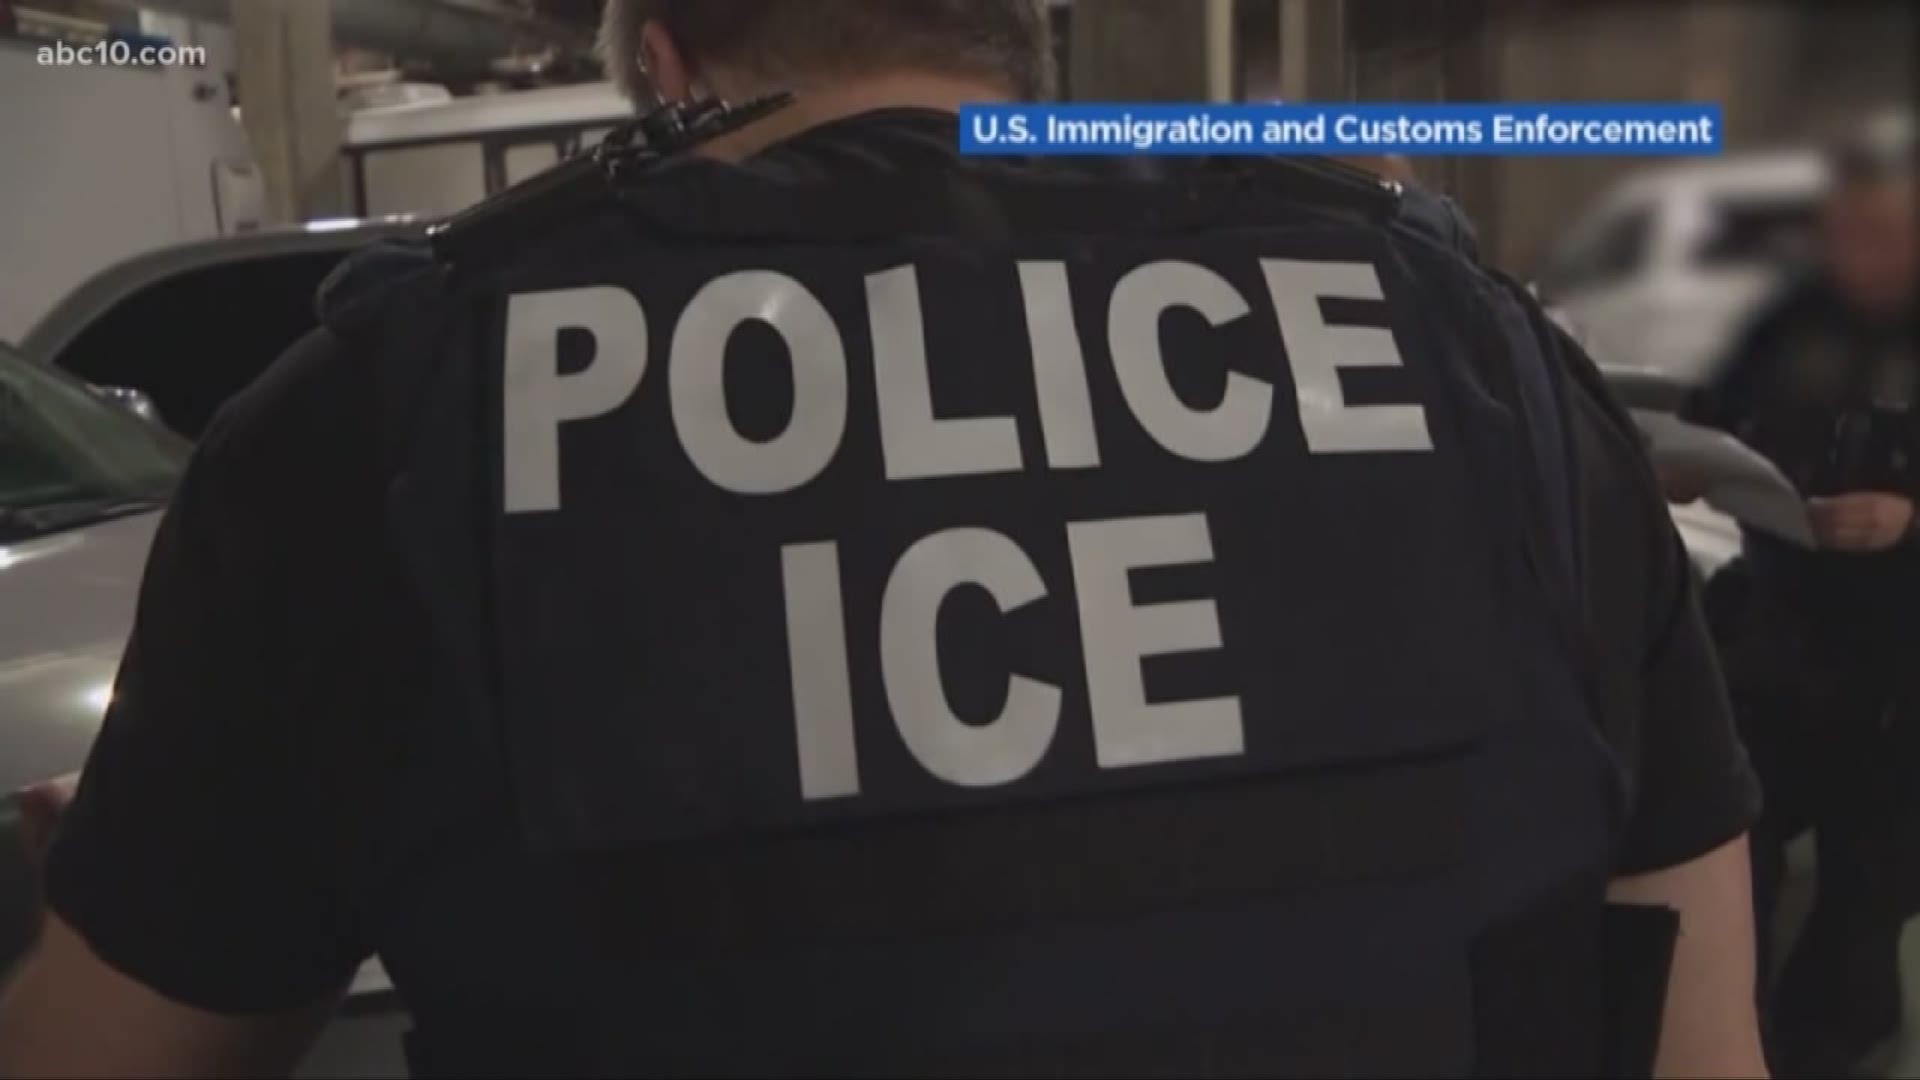 ABC10 spoke to attorney Luis Céspedes about deportation raids expected to take place nationwide over the weekend.